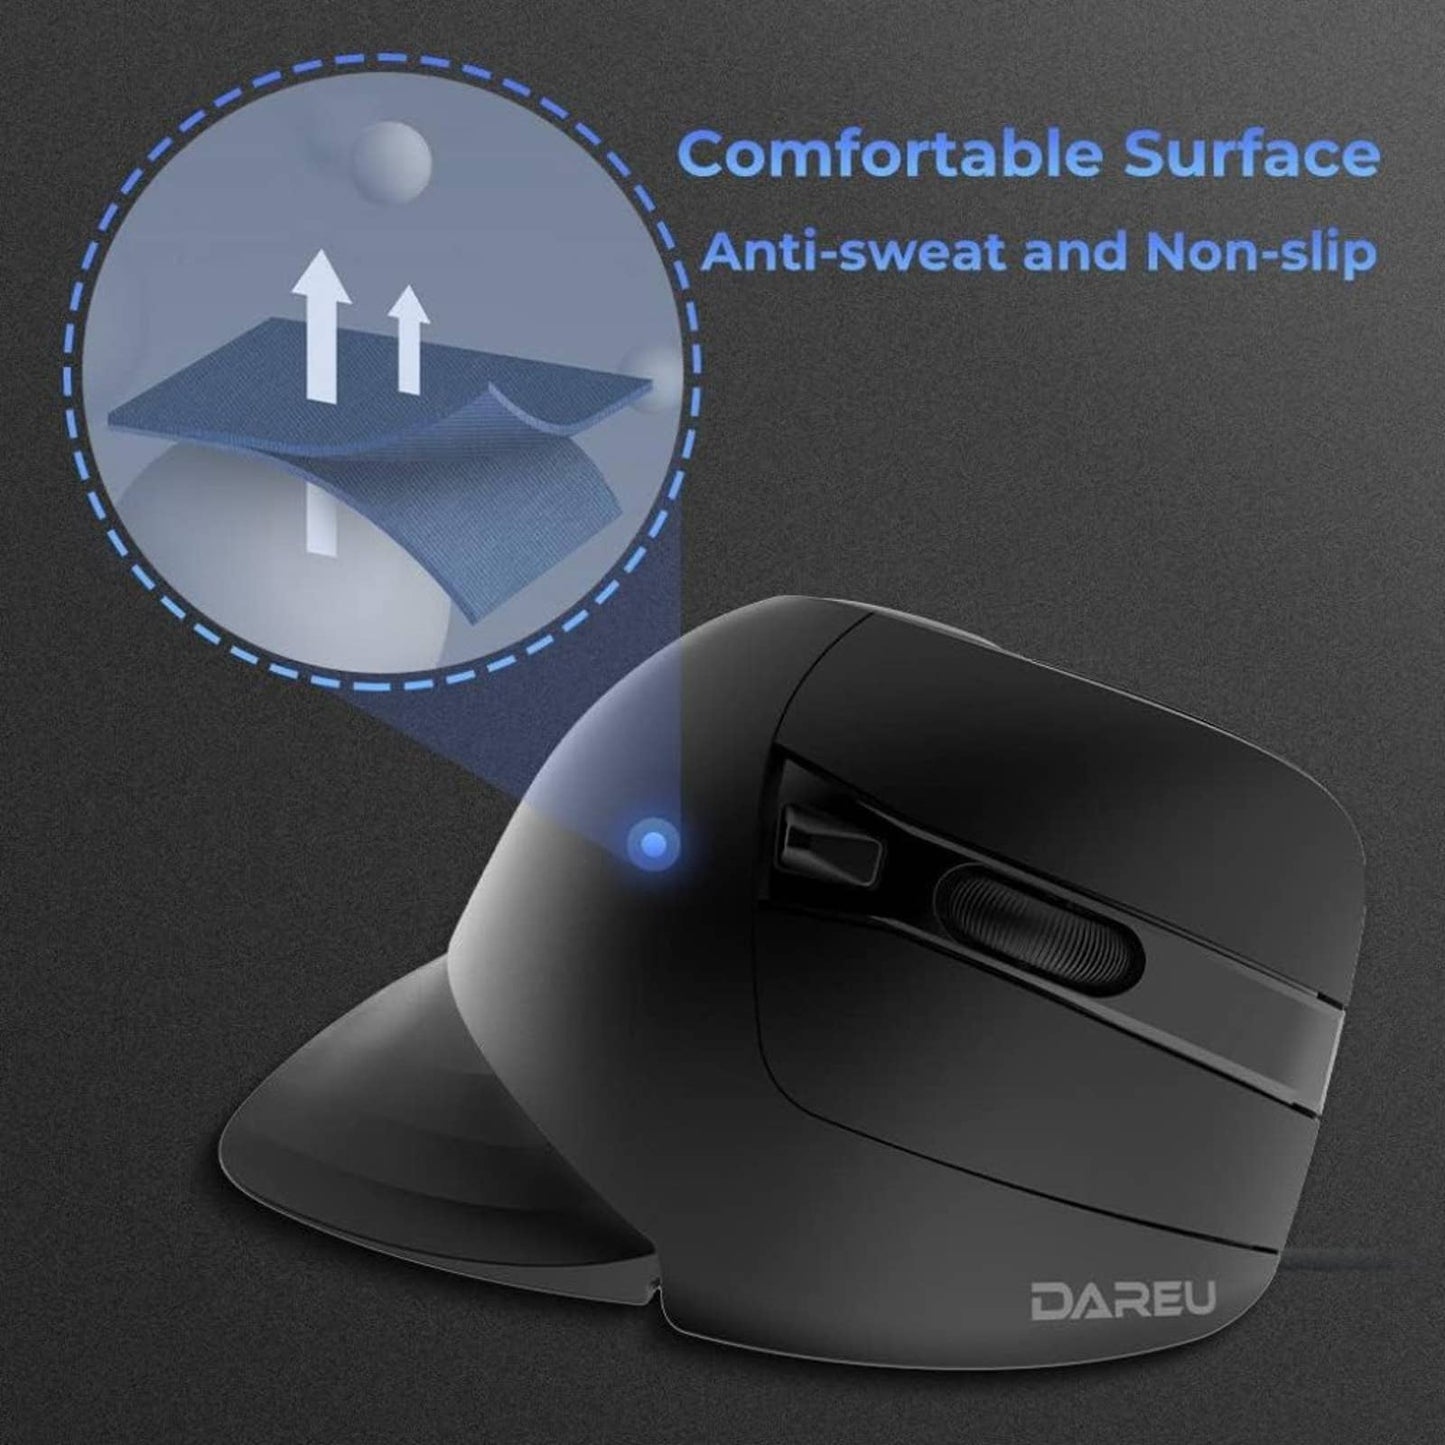 DAREU Vertical Ergonomic 89g Lightweight Optical Mouse, USB Wired Gaming Mouse